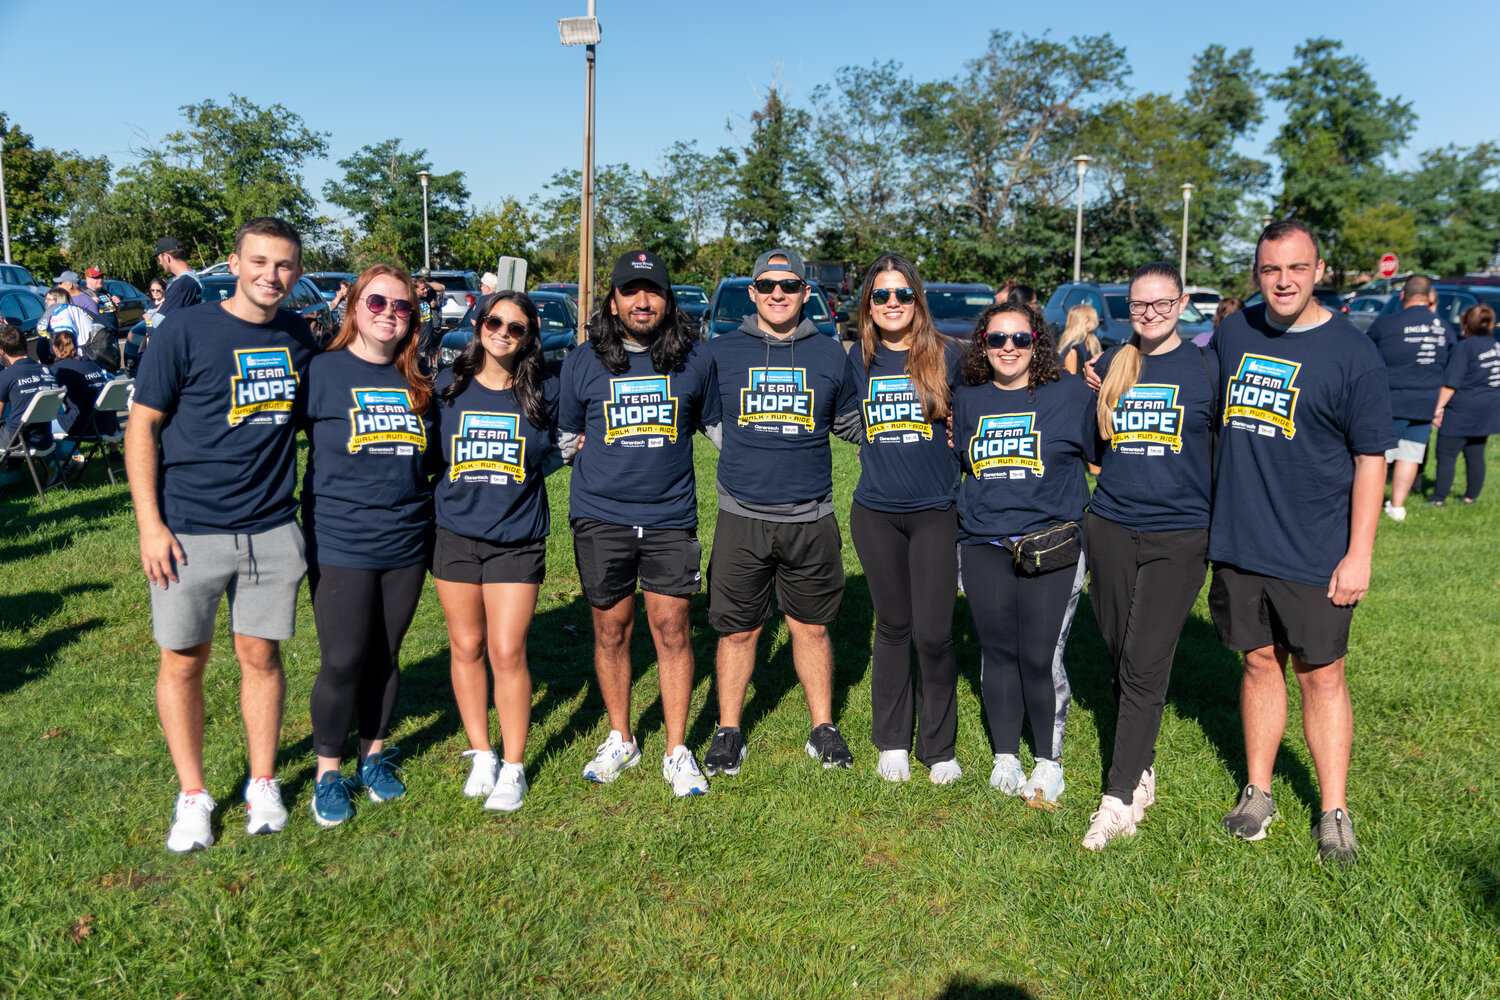 Friends and family get together at Wantagh Park to raise awareness for Huntington's disease as part of the Team Hope walk.